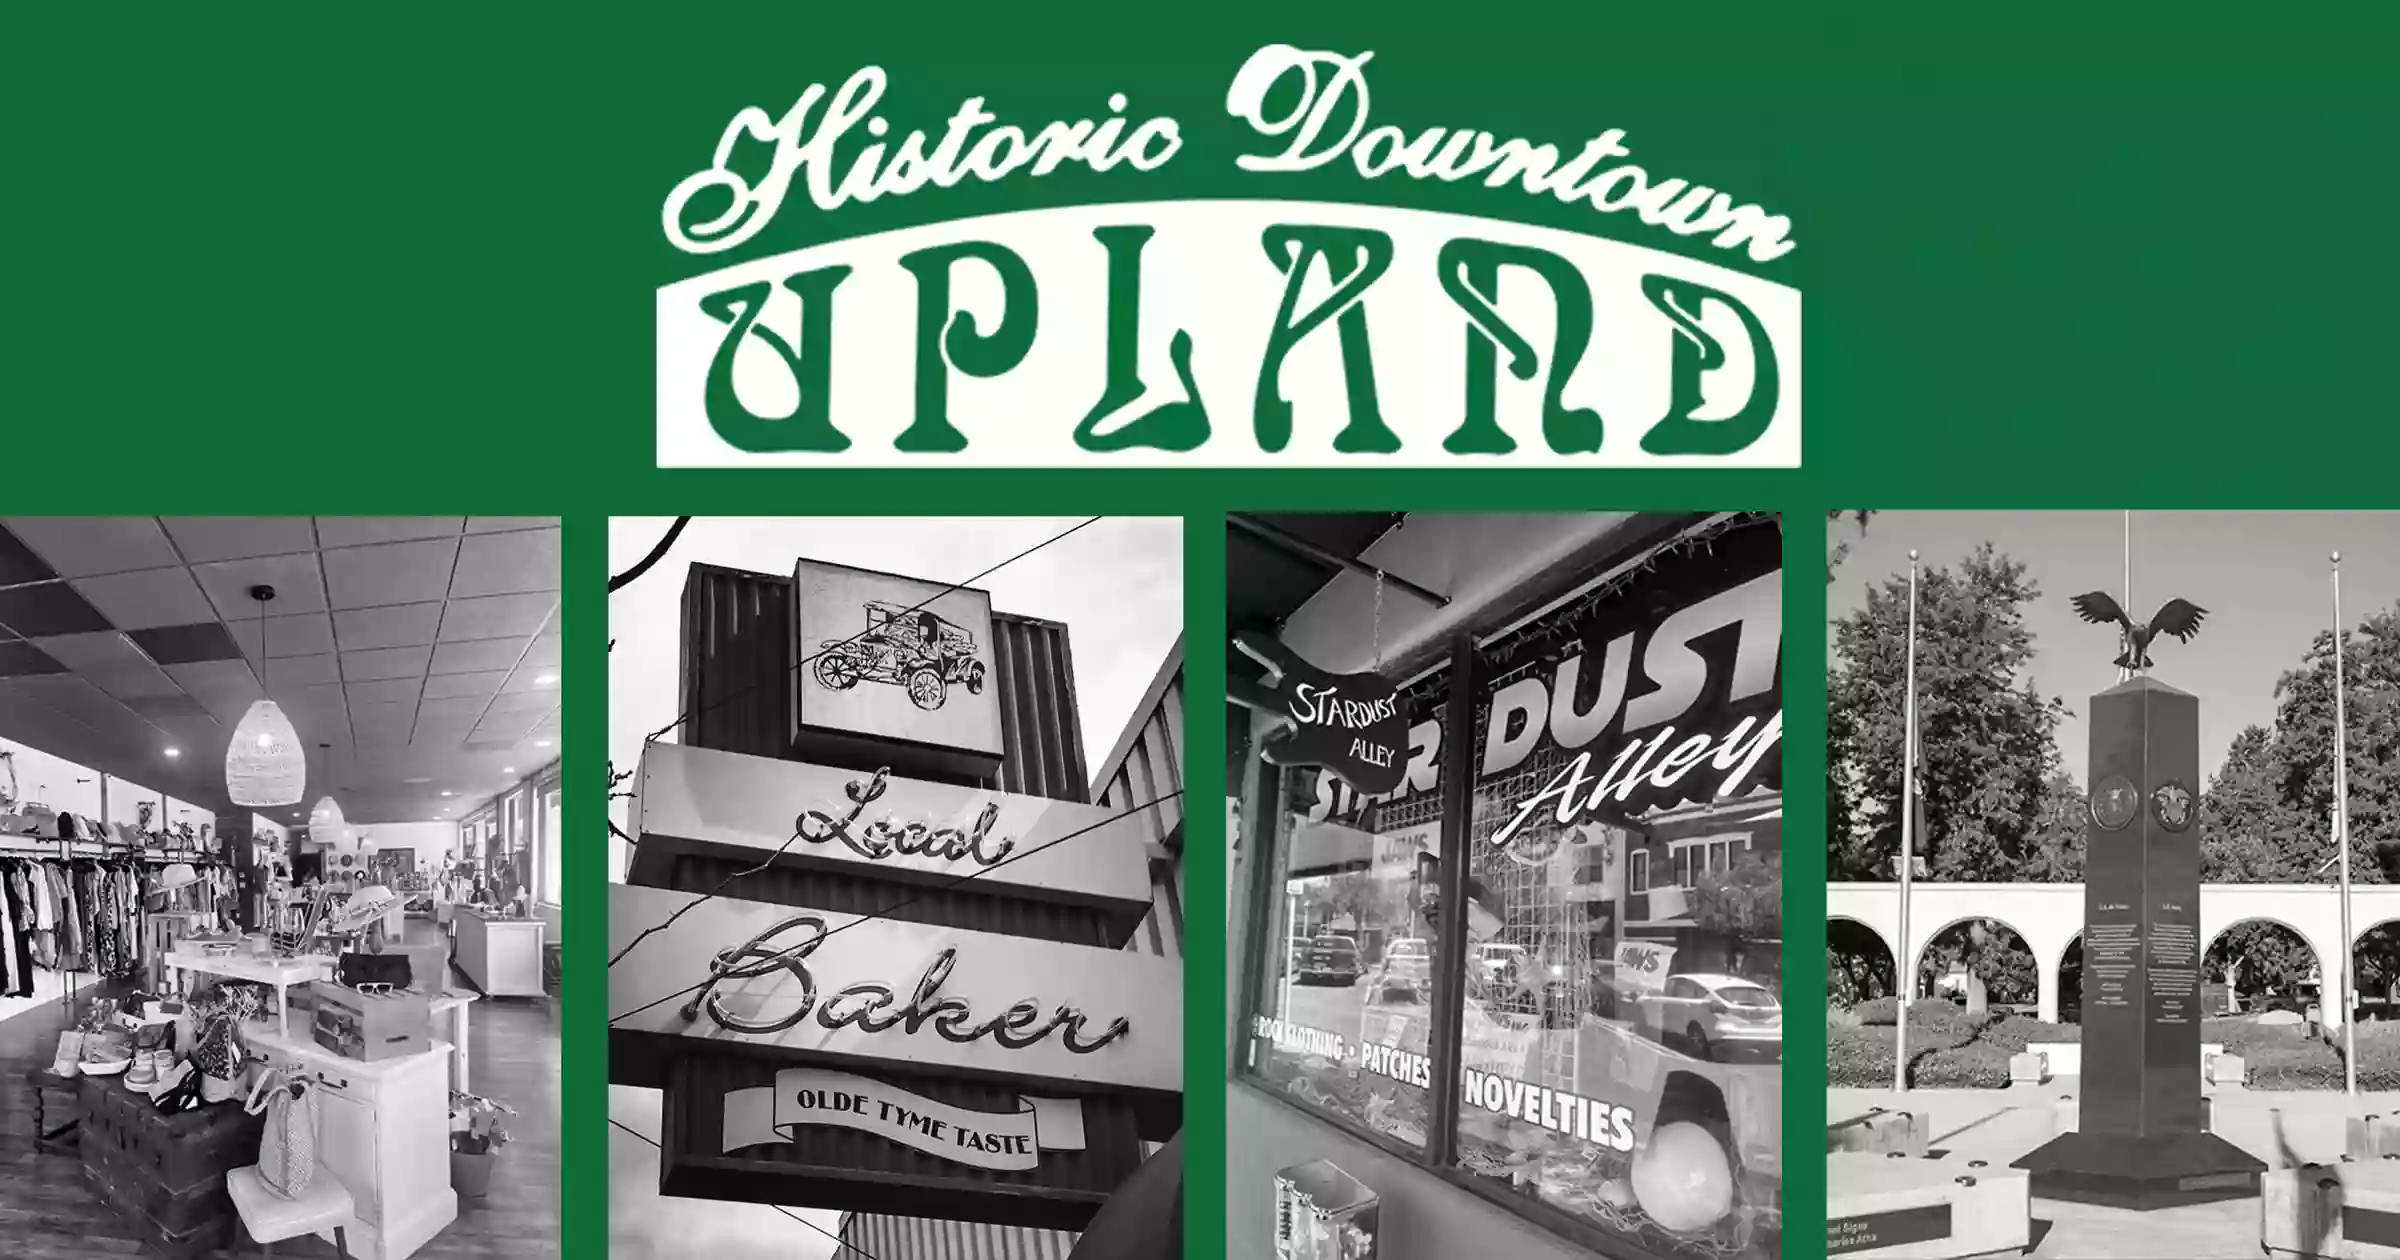 Historic Downtown Upland, Inc.